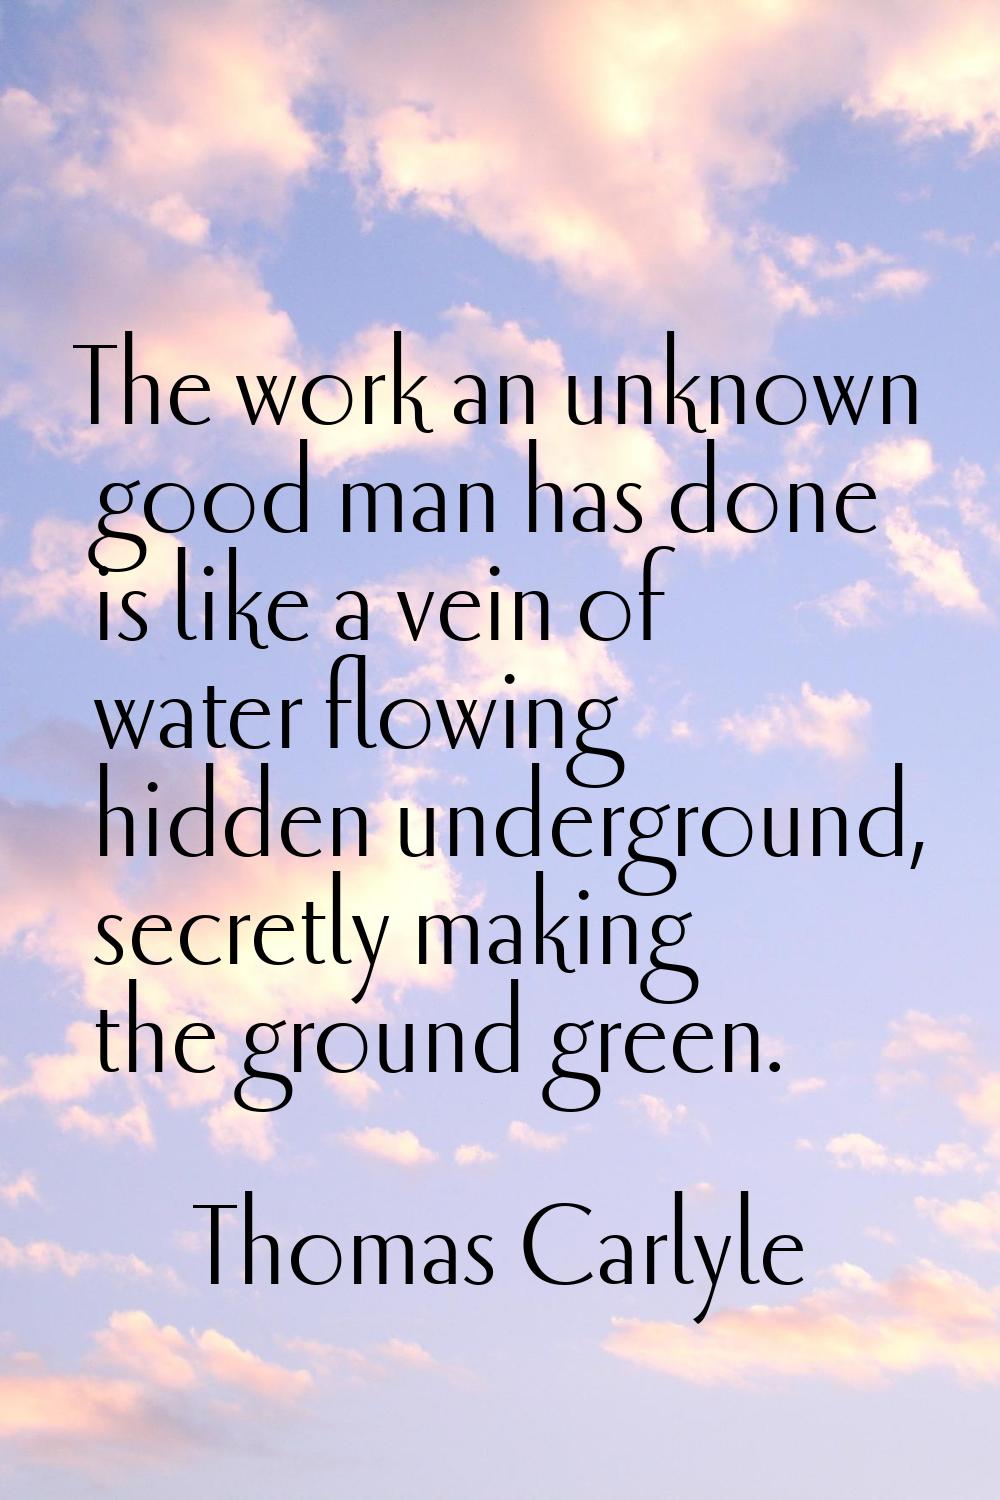 The work an unknown good man has done is like a vein of water flowing hidden underground, secretly 